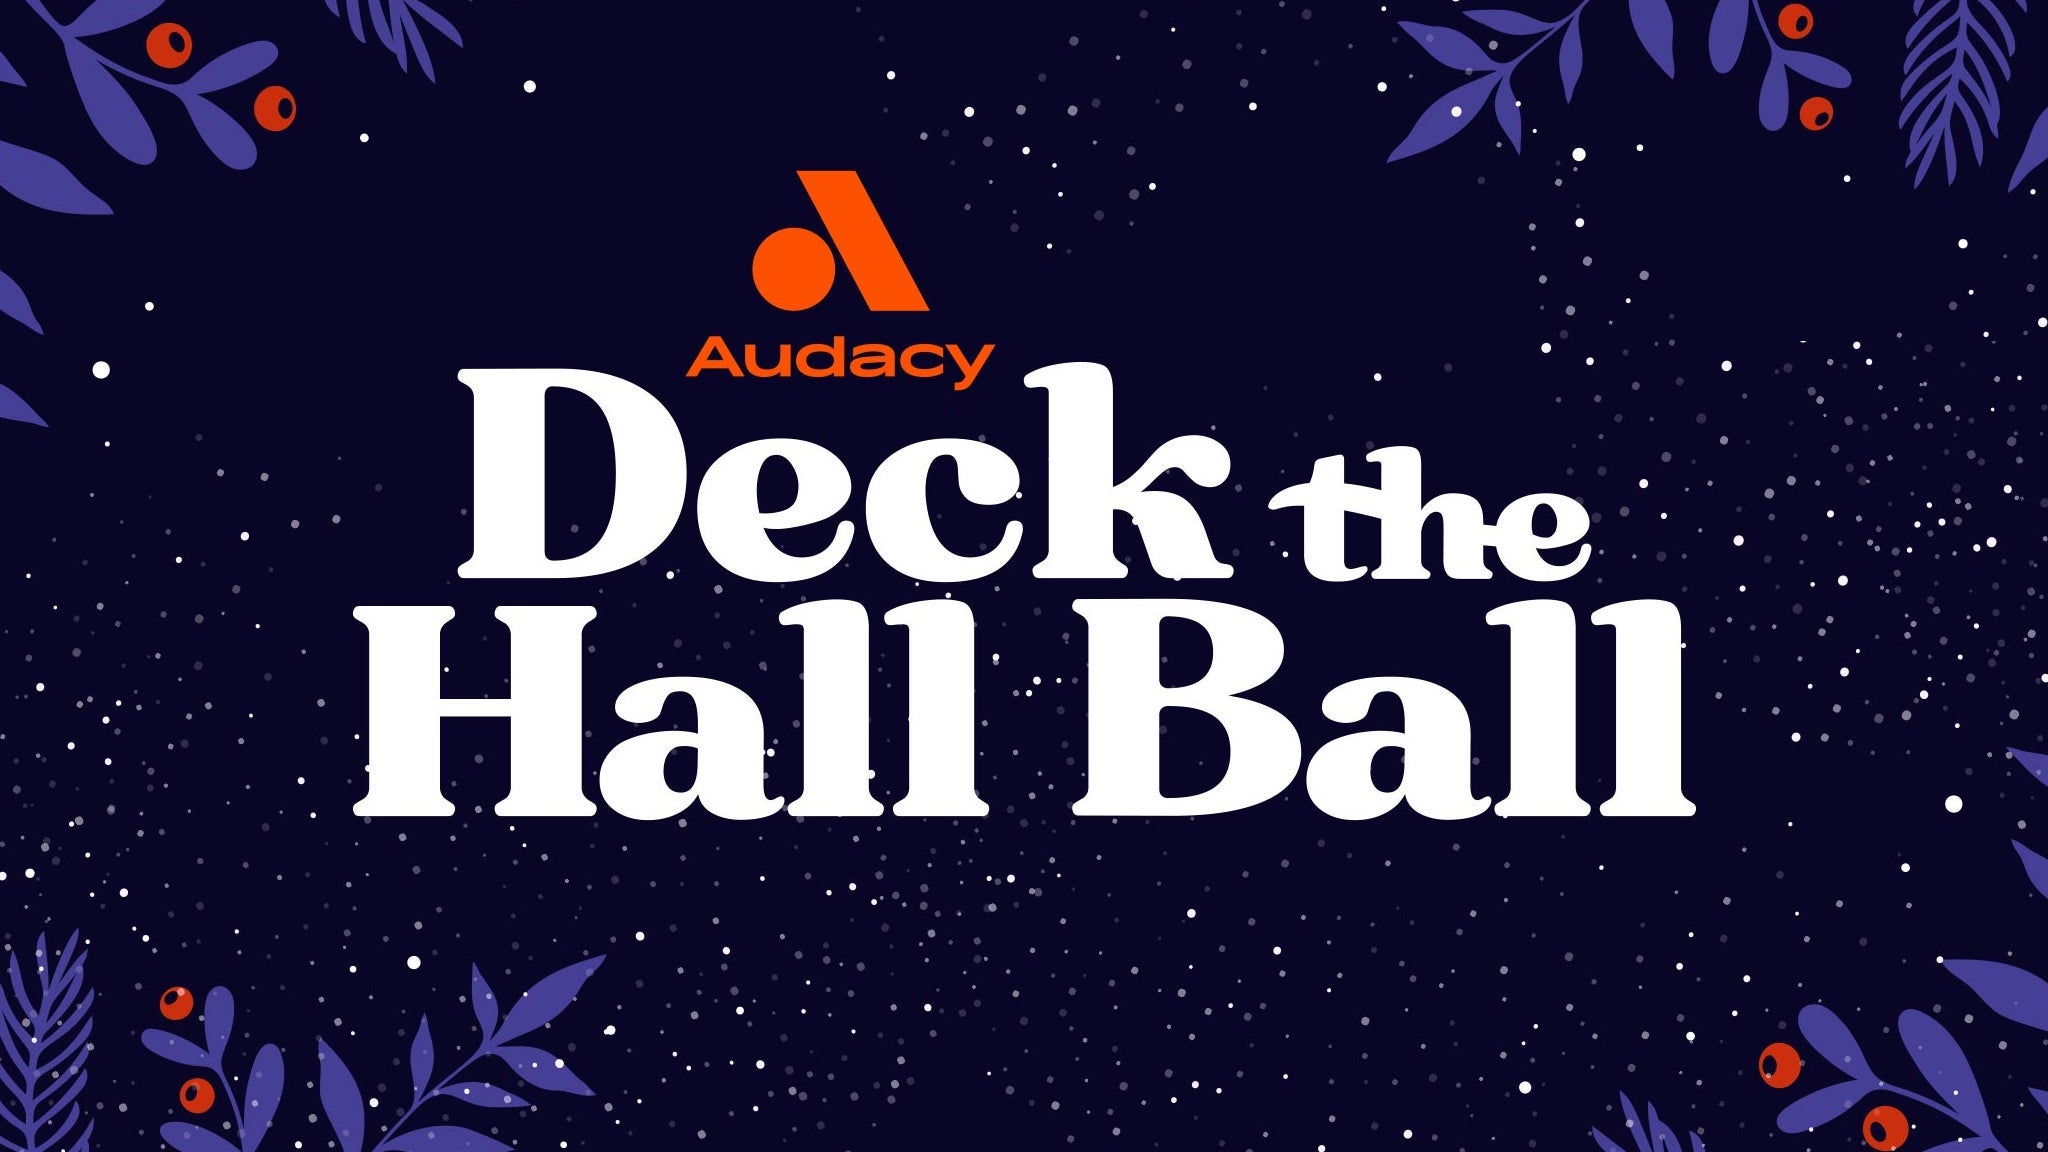 Y98's Deck The Hall Ball starring Train